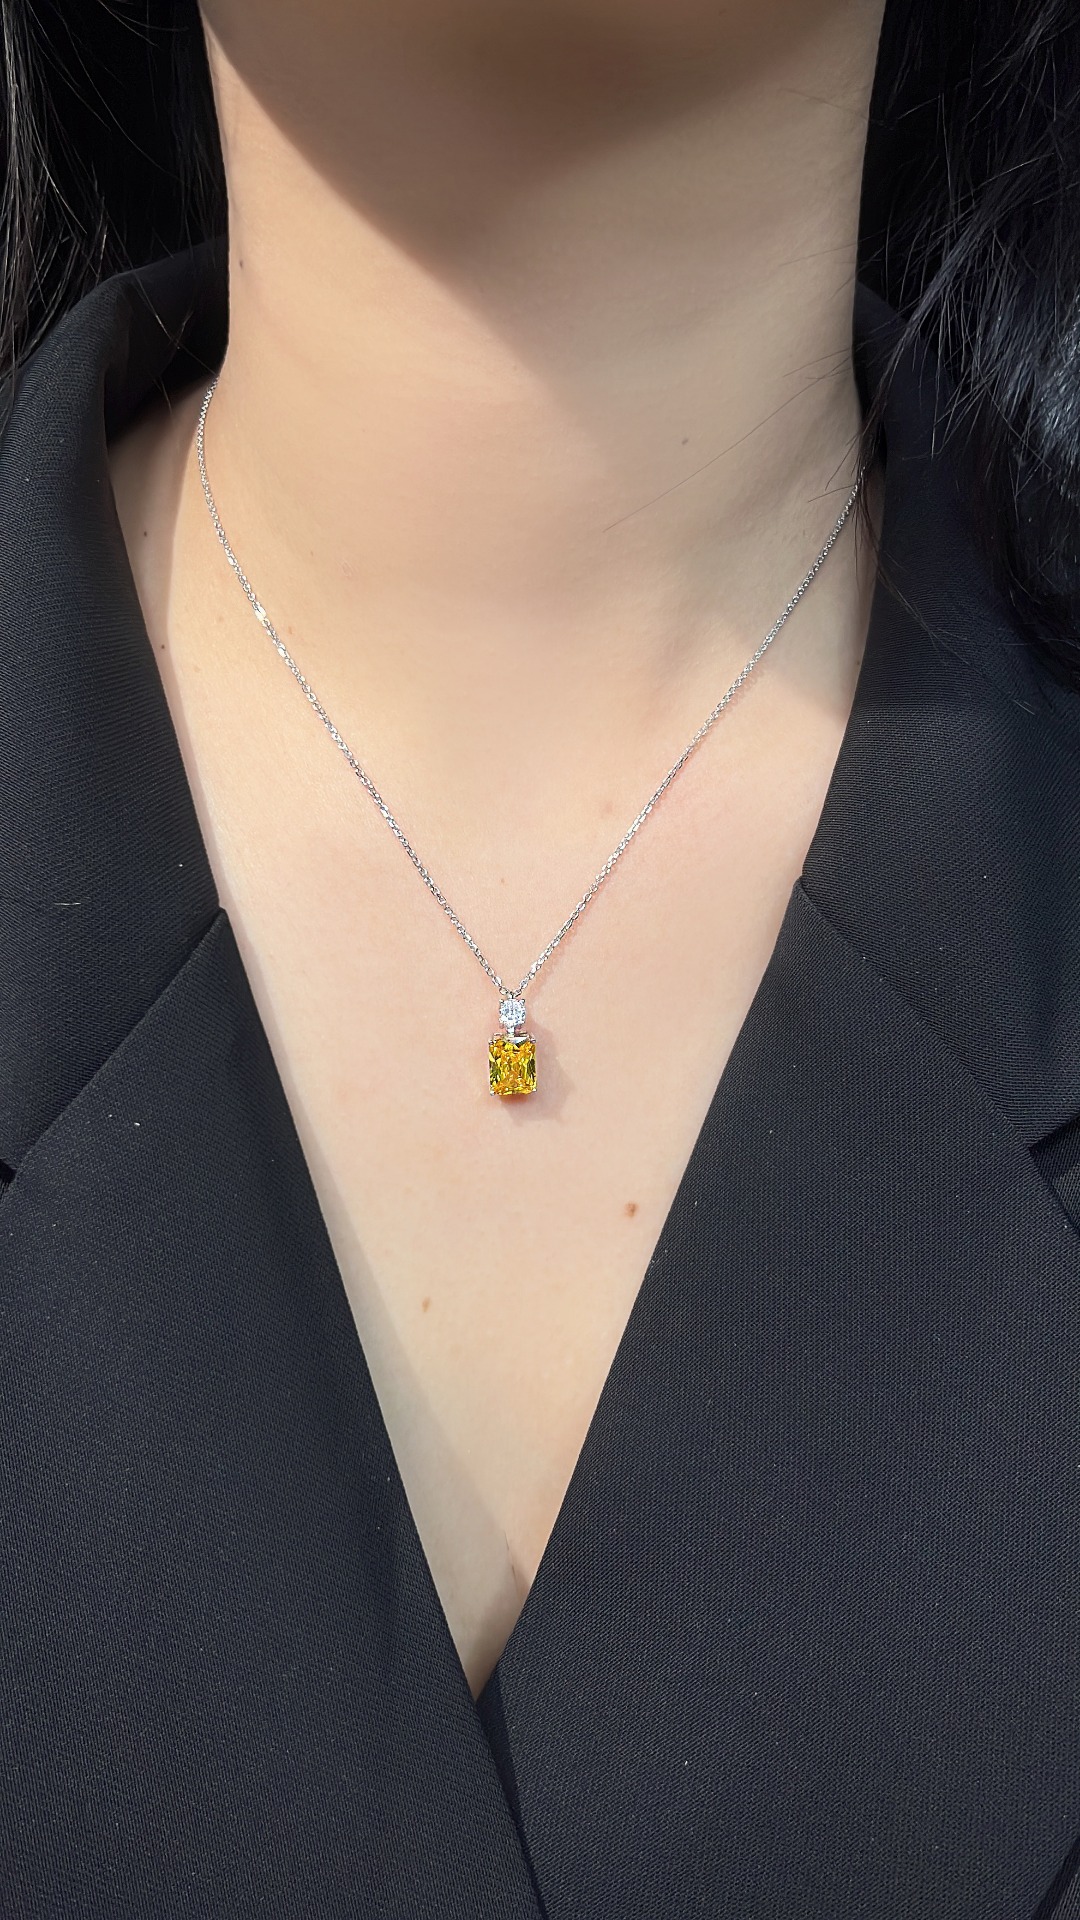 Colored Jewelry Radian Square Yellow Diamond Necklace